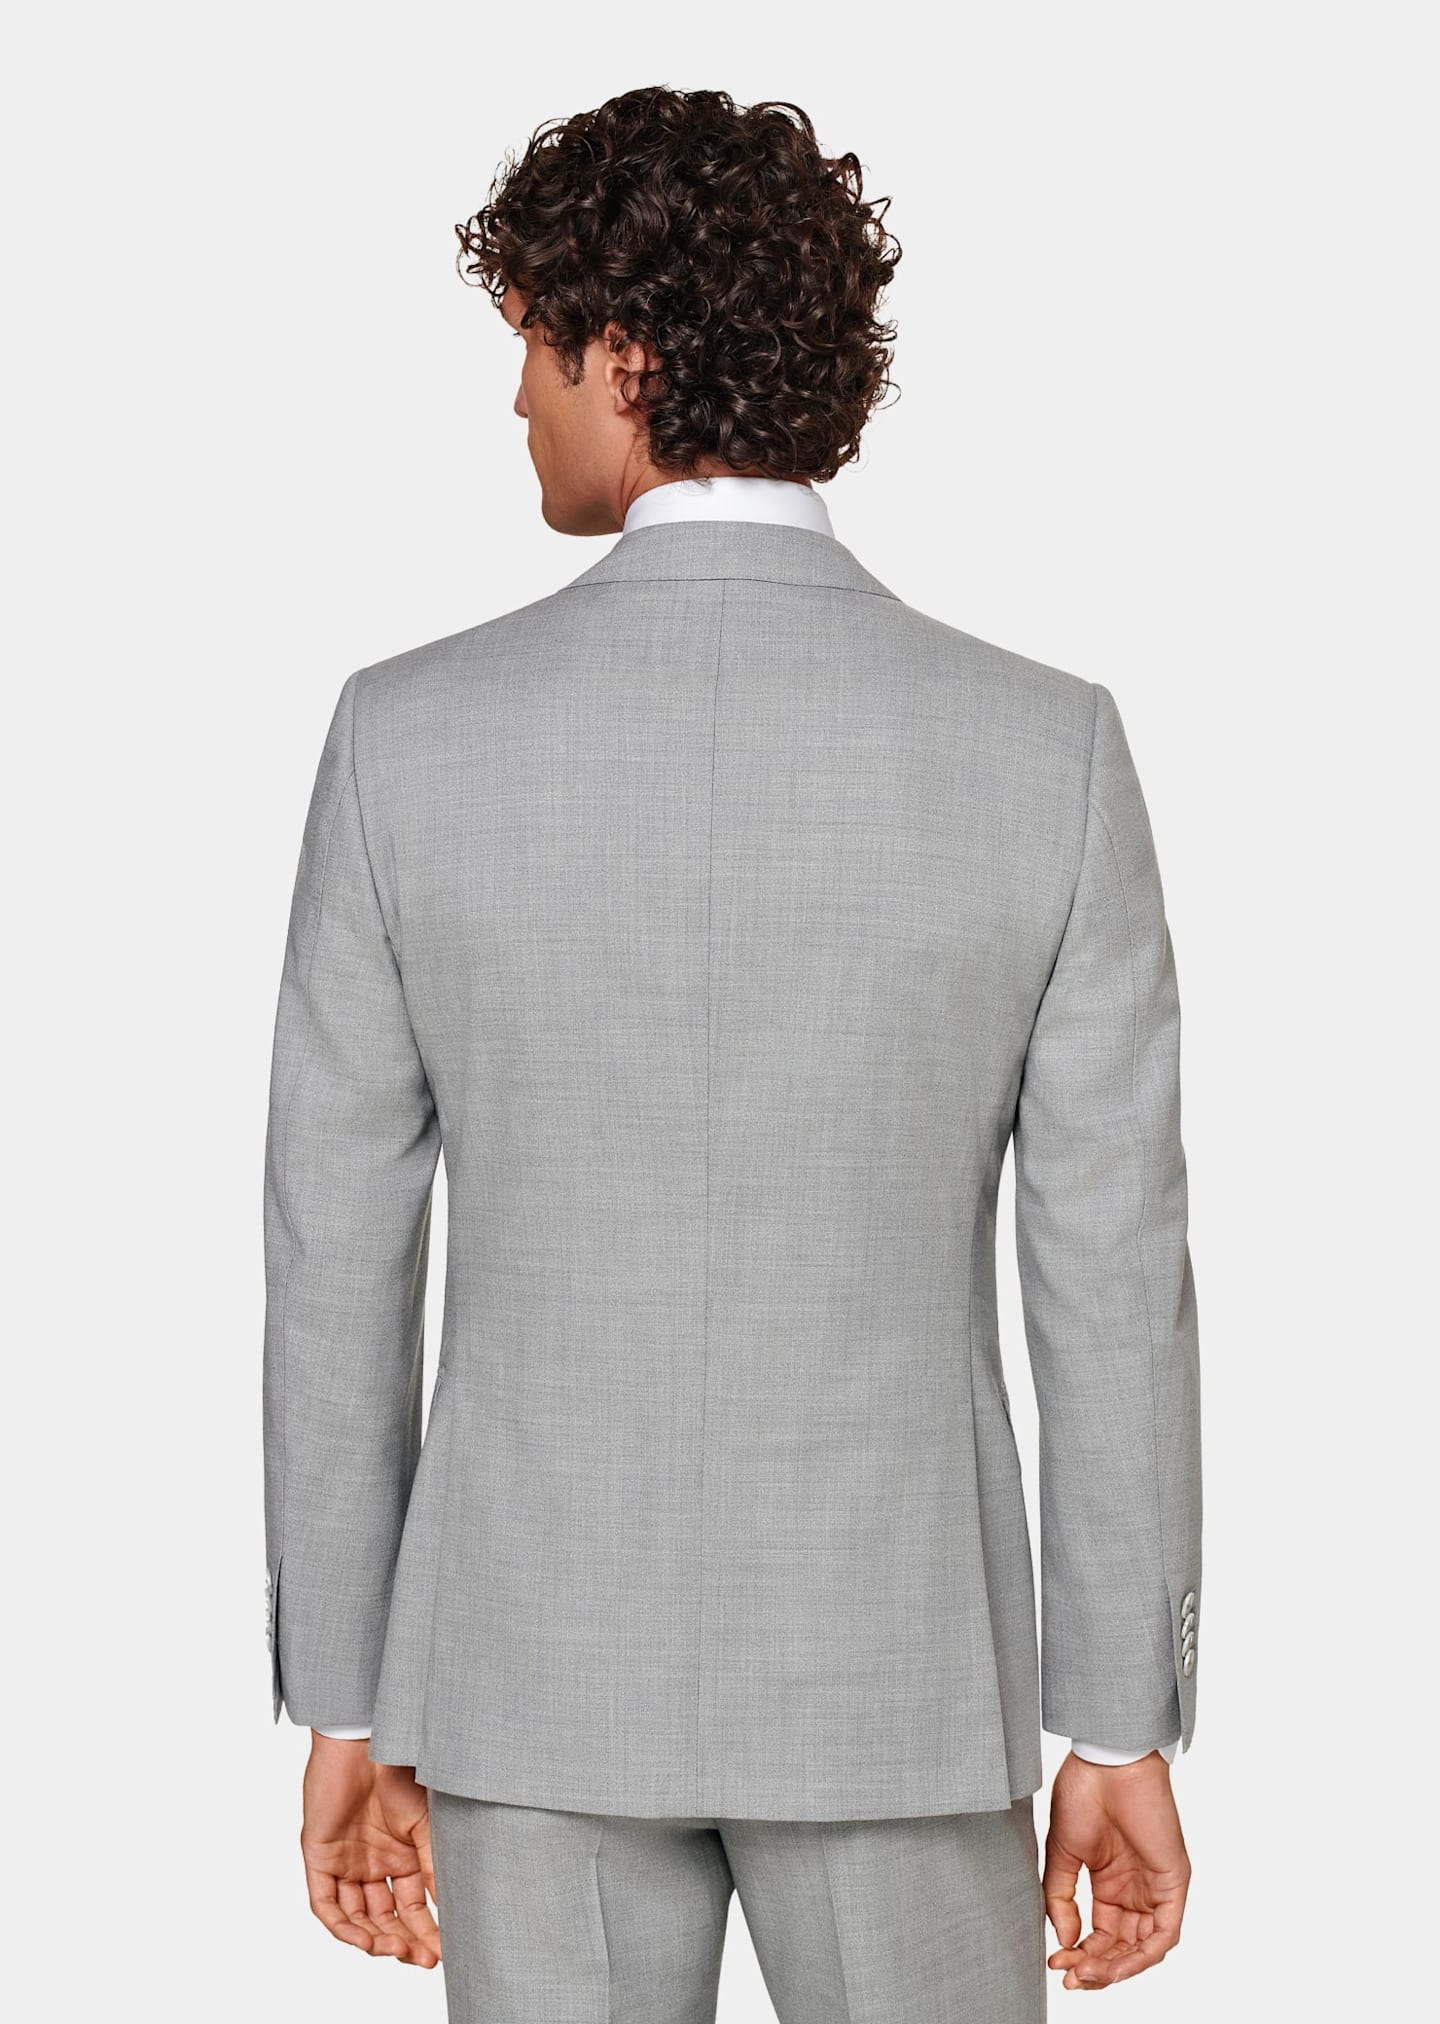 Rear view of grey slim fit suit